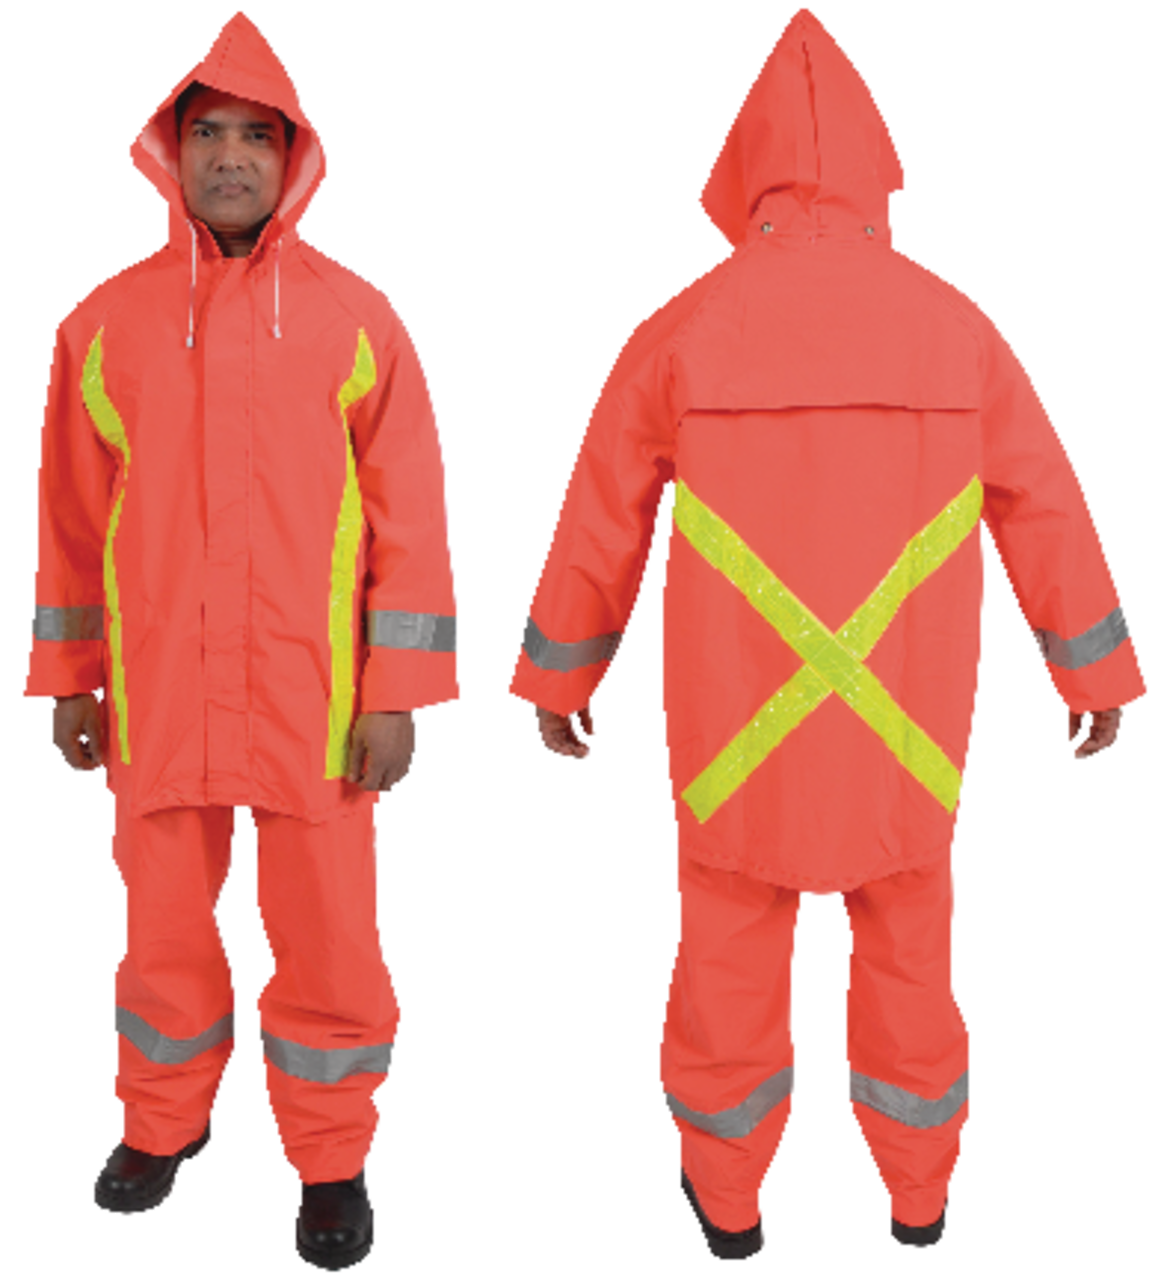 Forcefield Hi-Vis Waterproof Rain Suit with Reflective Tape and Removable  Hood, Orange